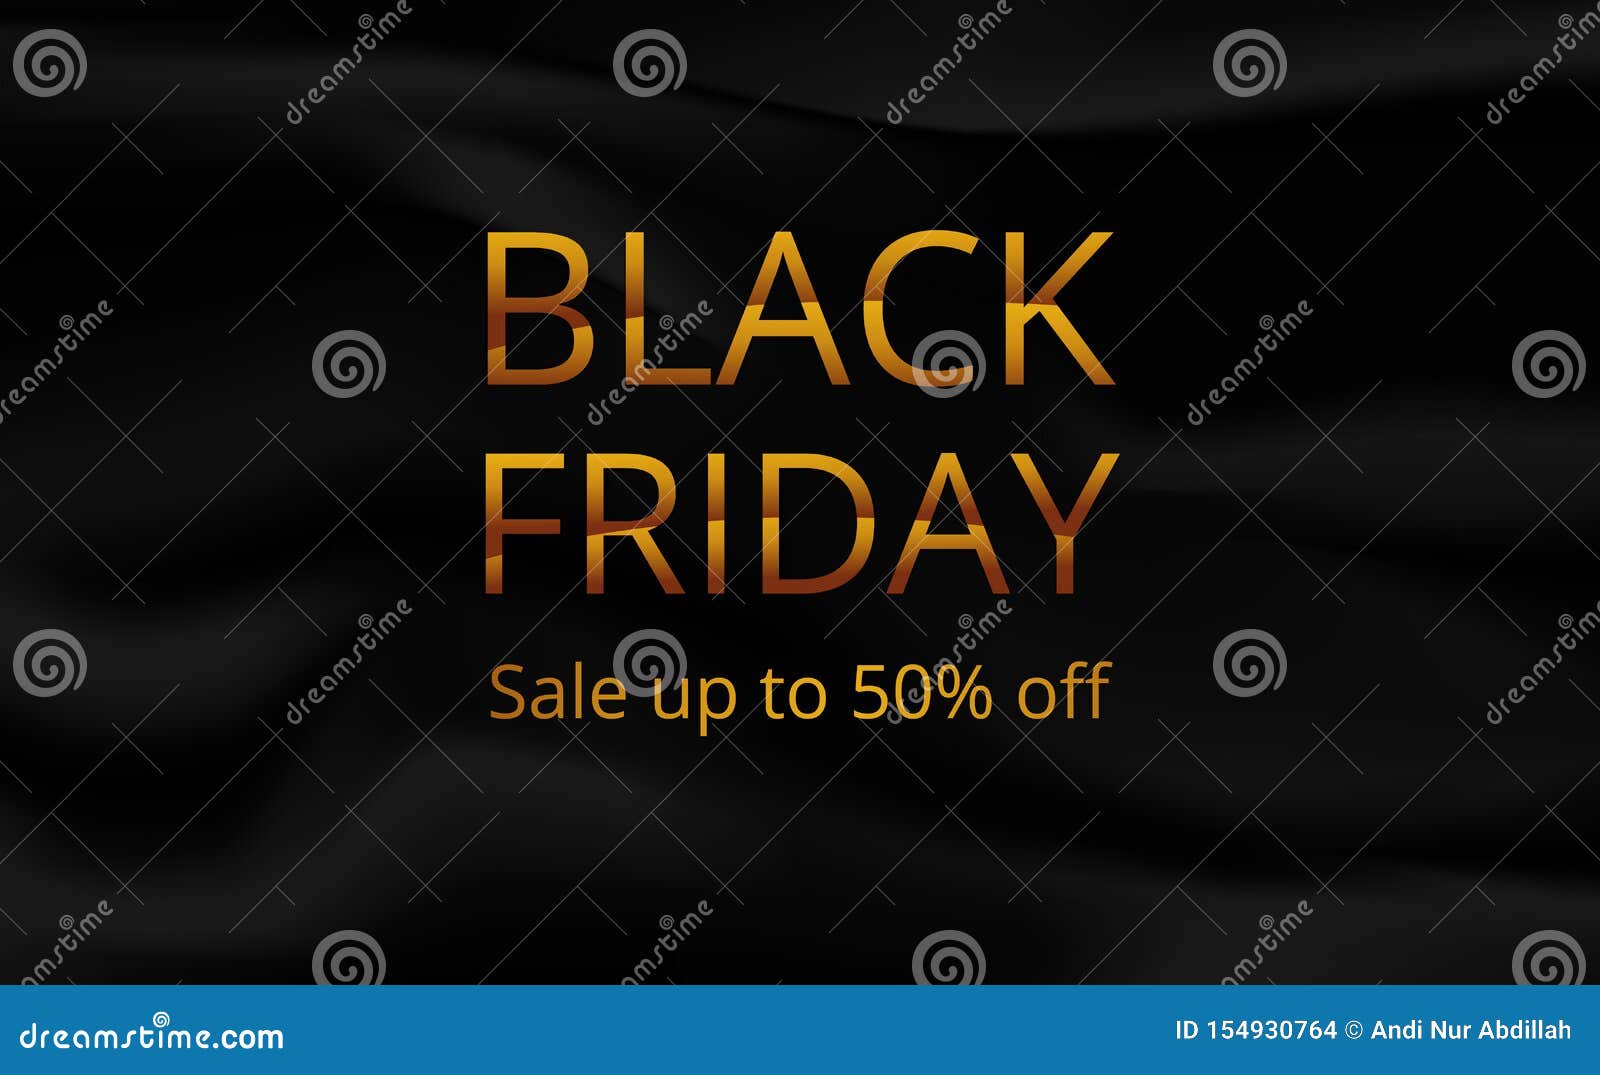 Black Friday Sale Offer Banner Poster Template With Black Silk Fabric - What Is The Sale Day After Black Friday Called